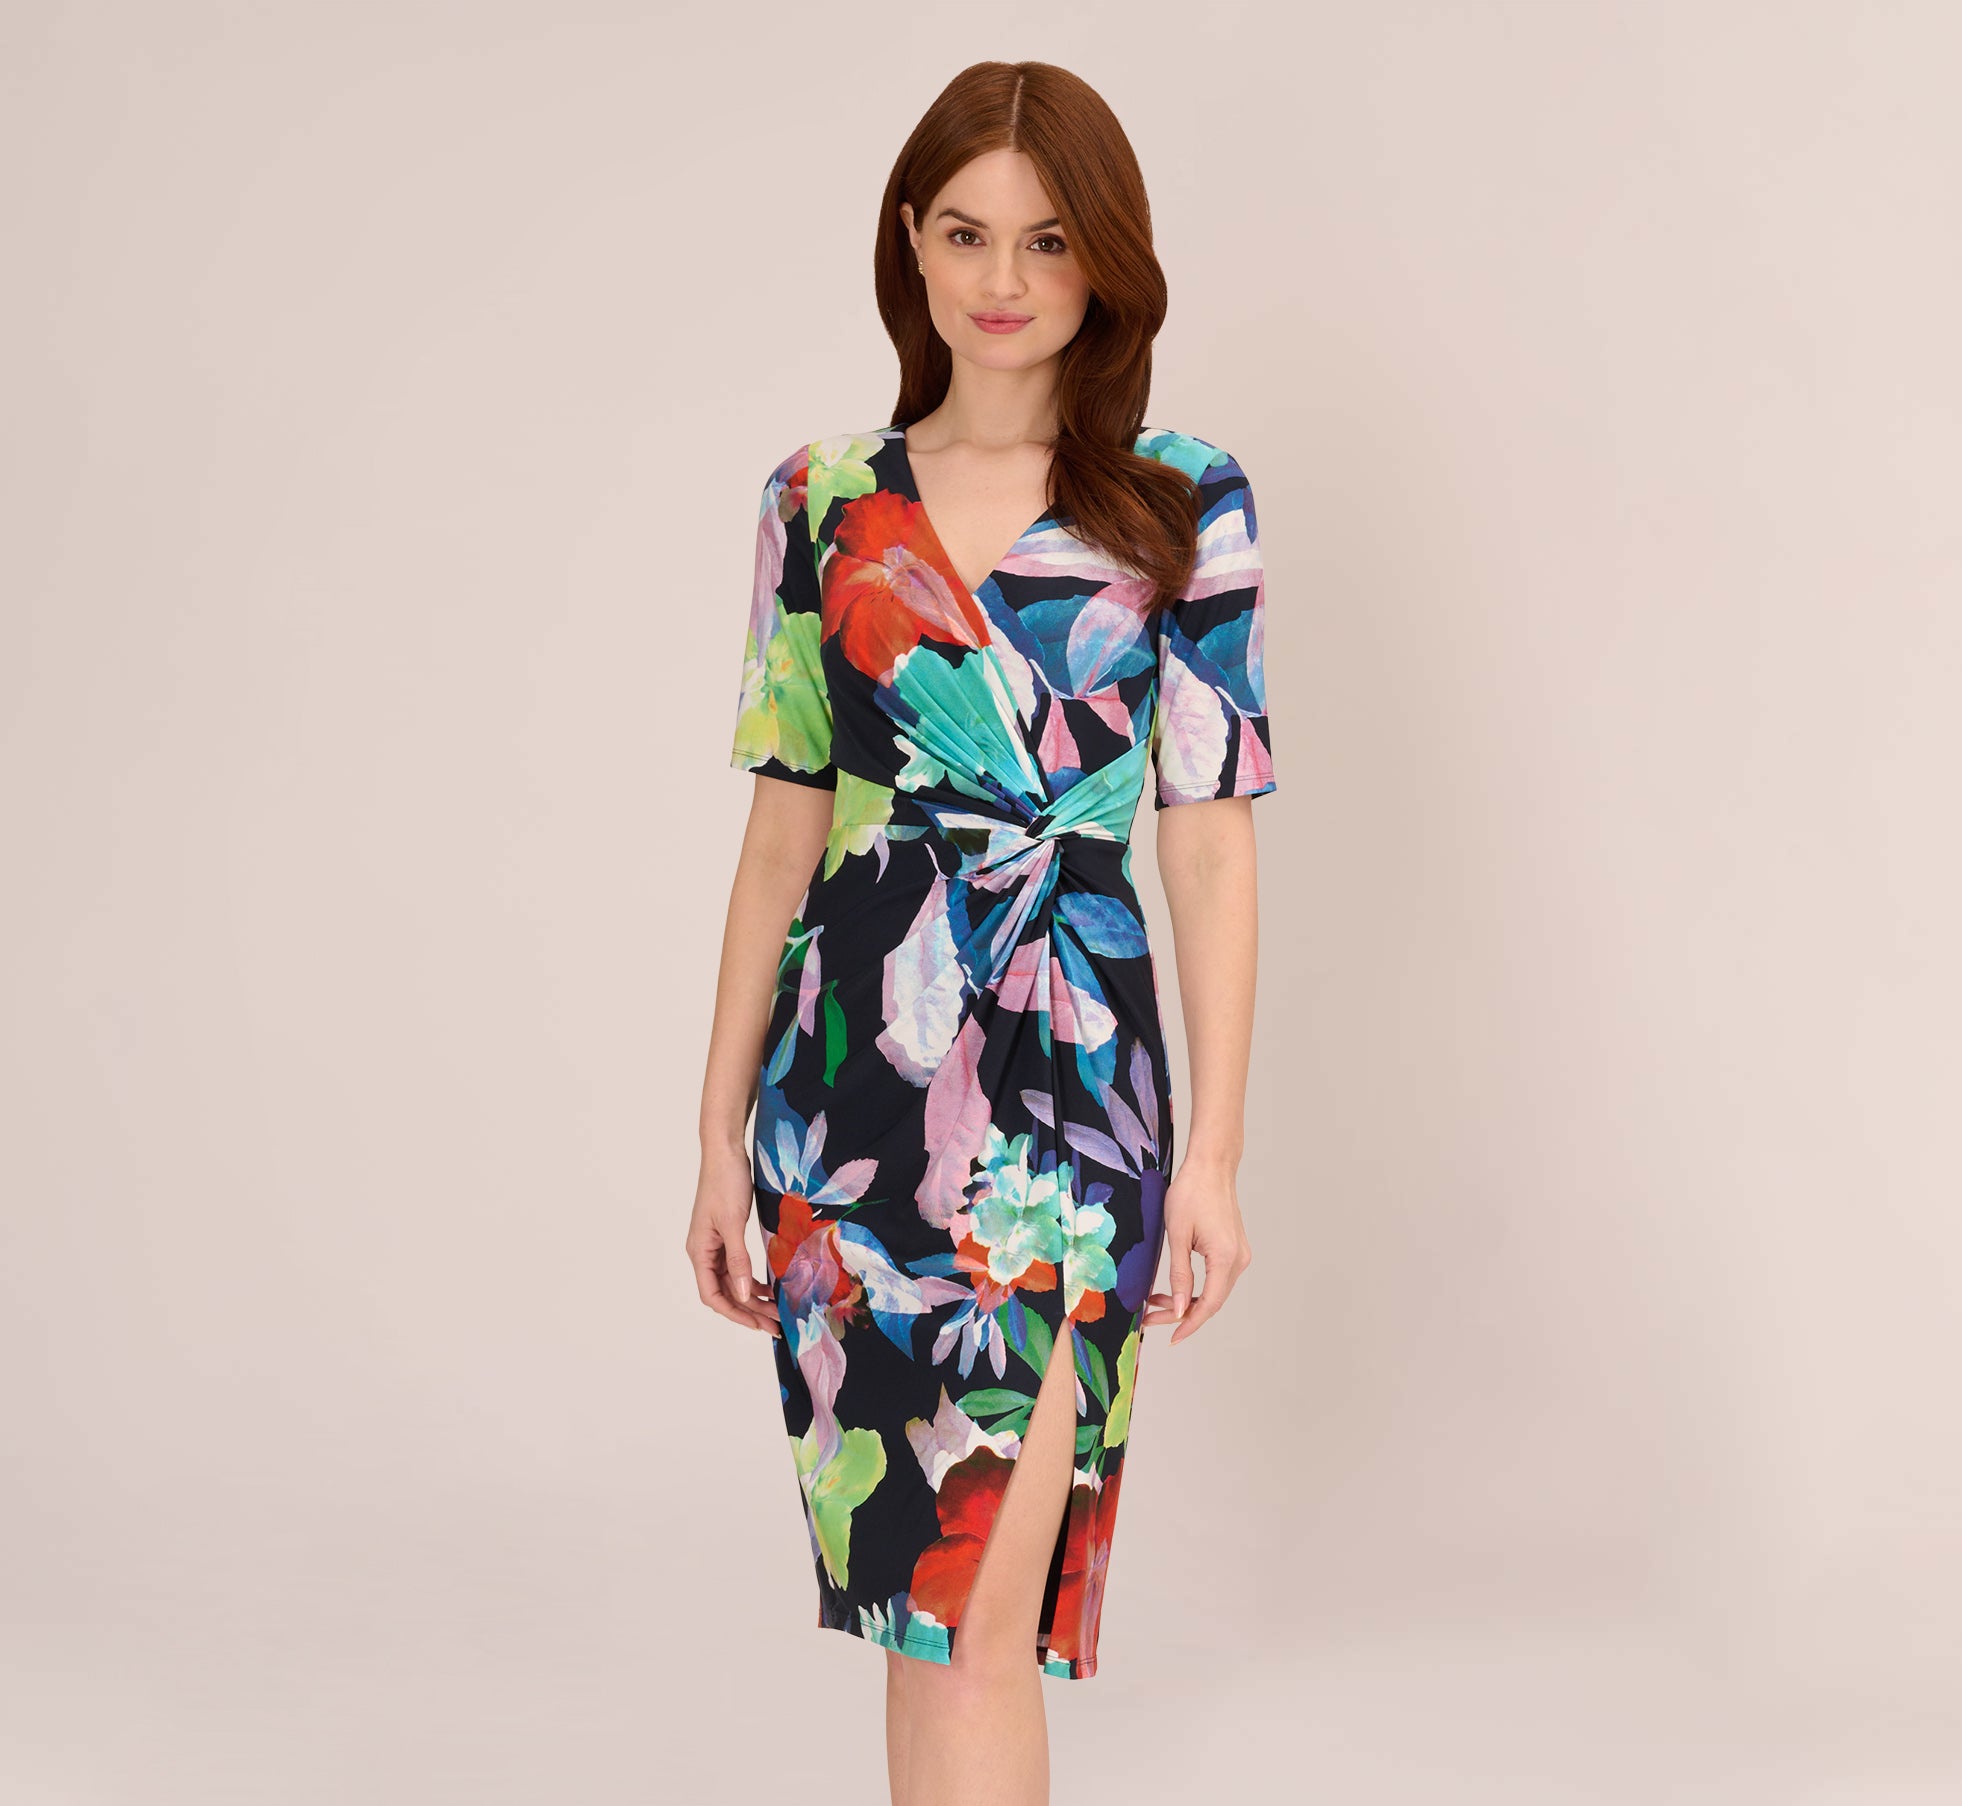 Floral Knotted Sheath Dress With Elbow-Length Sleeves In Dark Navy